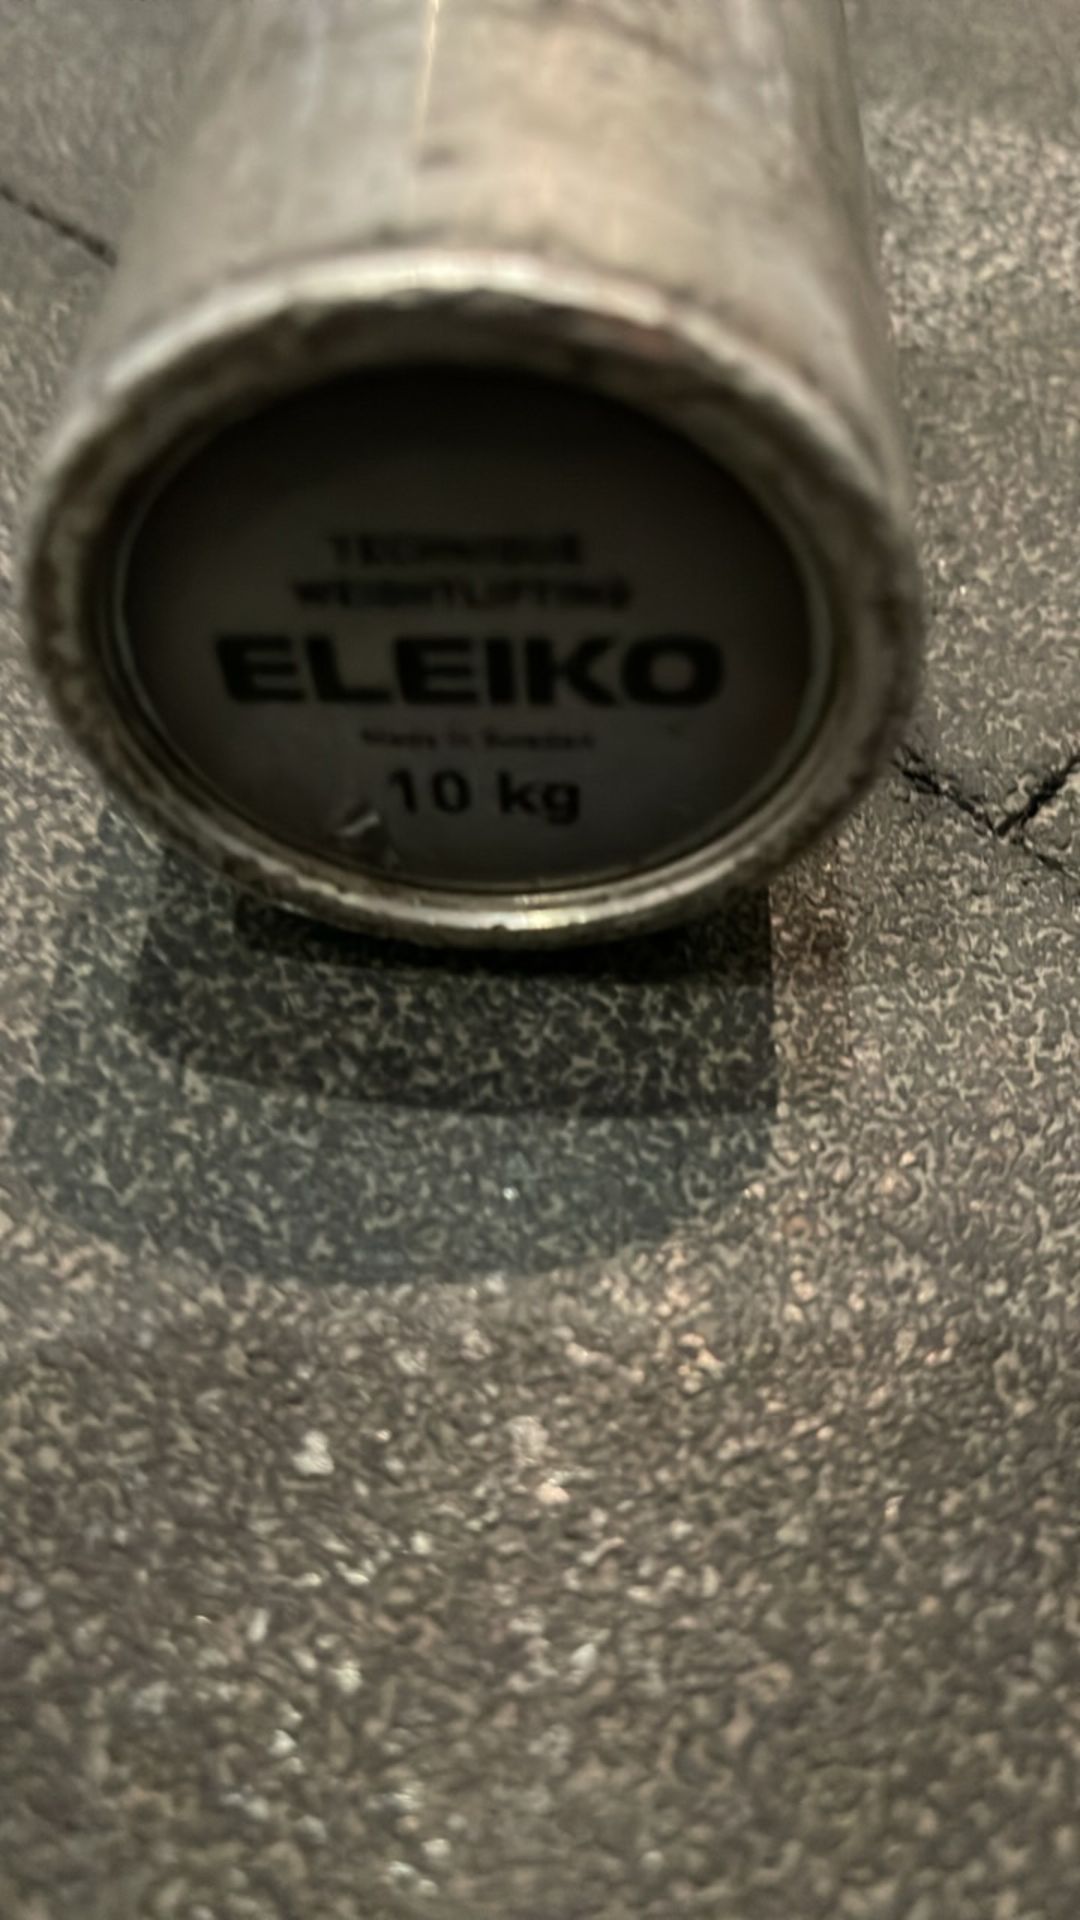 Eleiko 10kg Olympic Barbell - Image 2 of 4